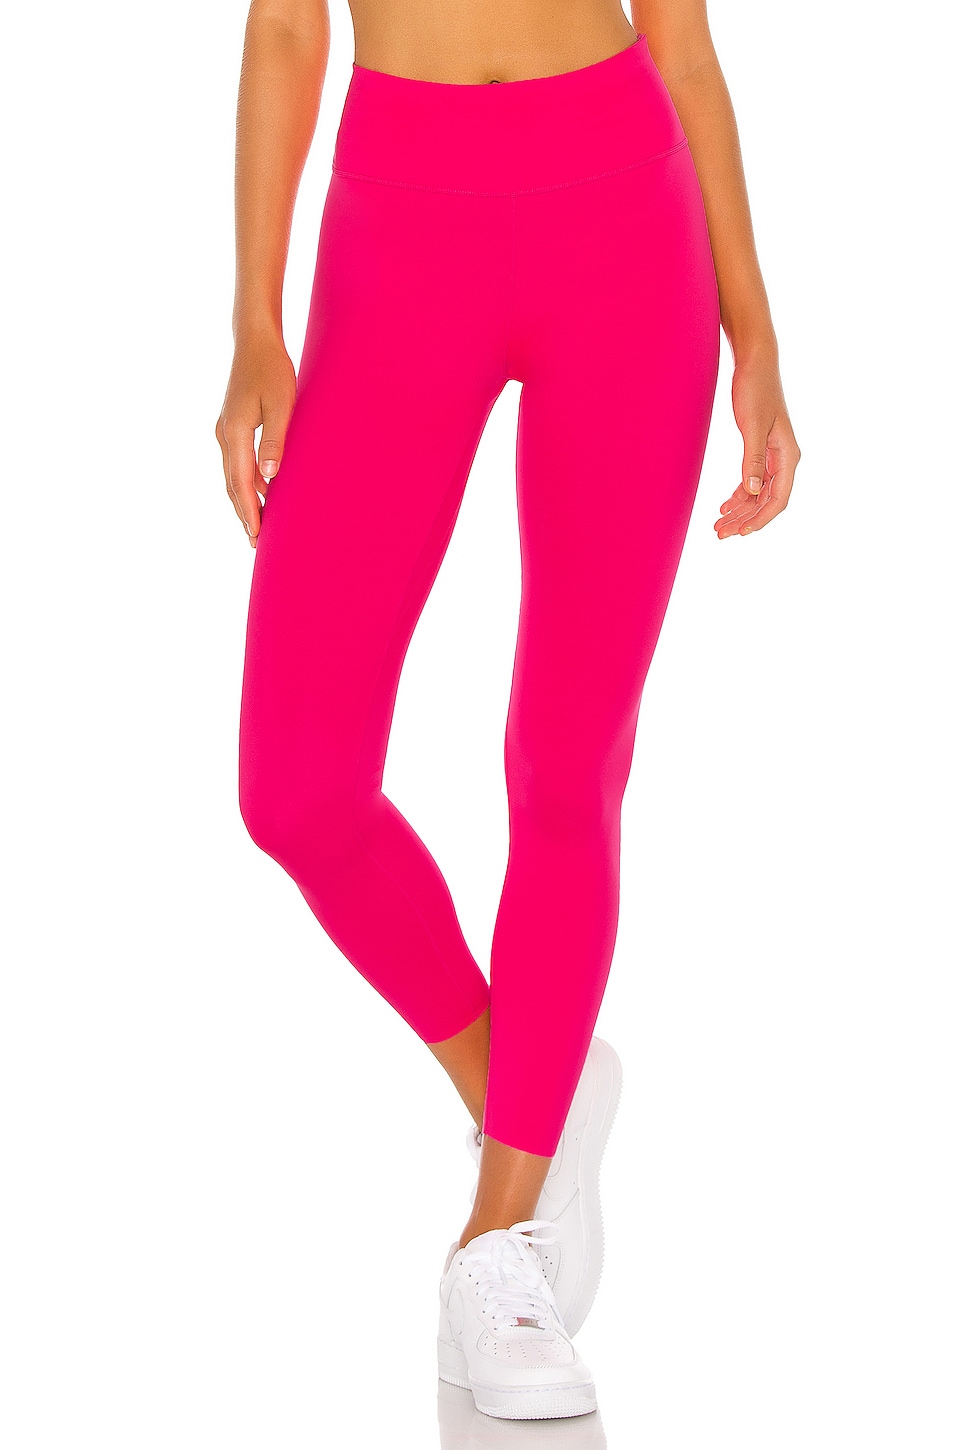 Nike One Luxe 7/8 Tight in Hyper Pink | REVOLVE